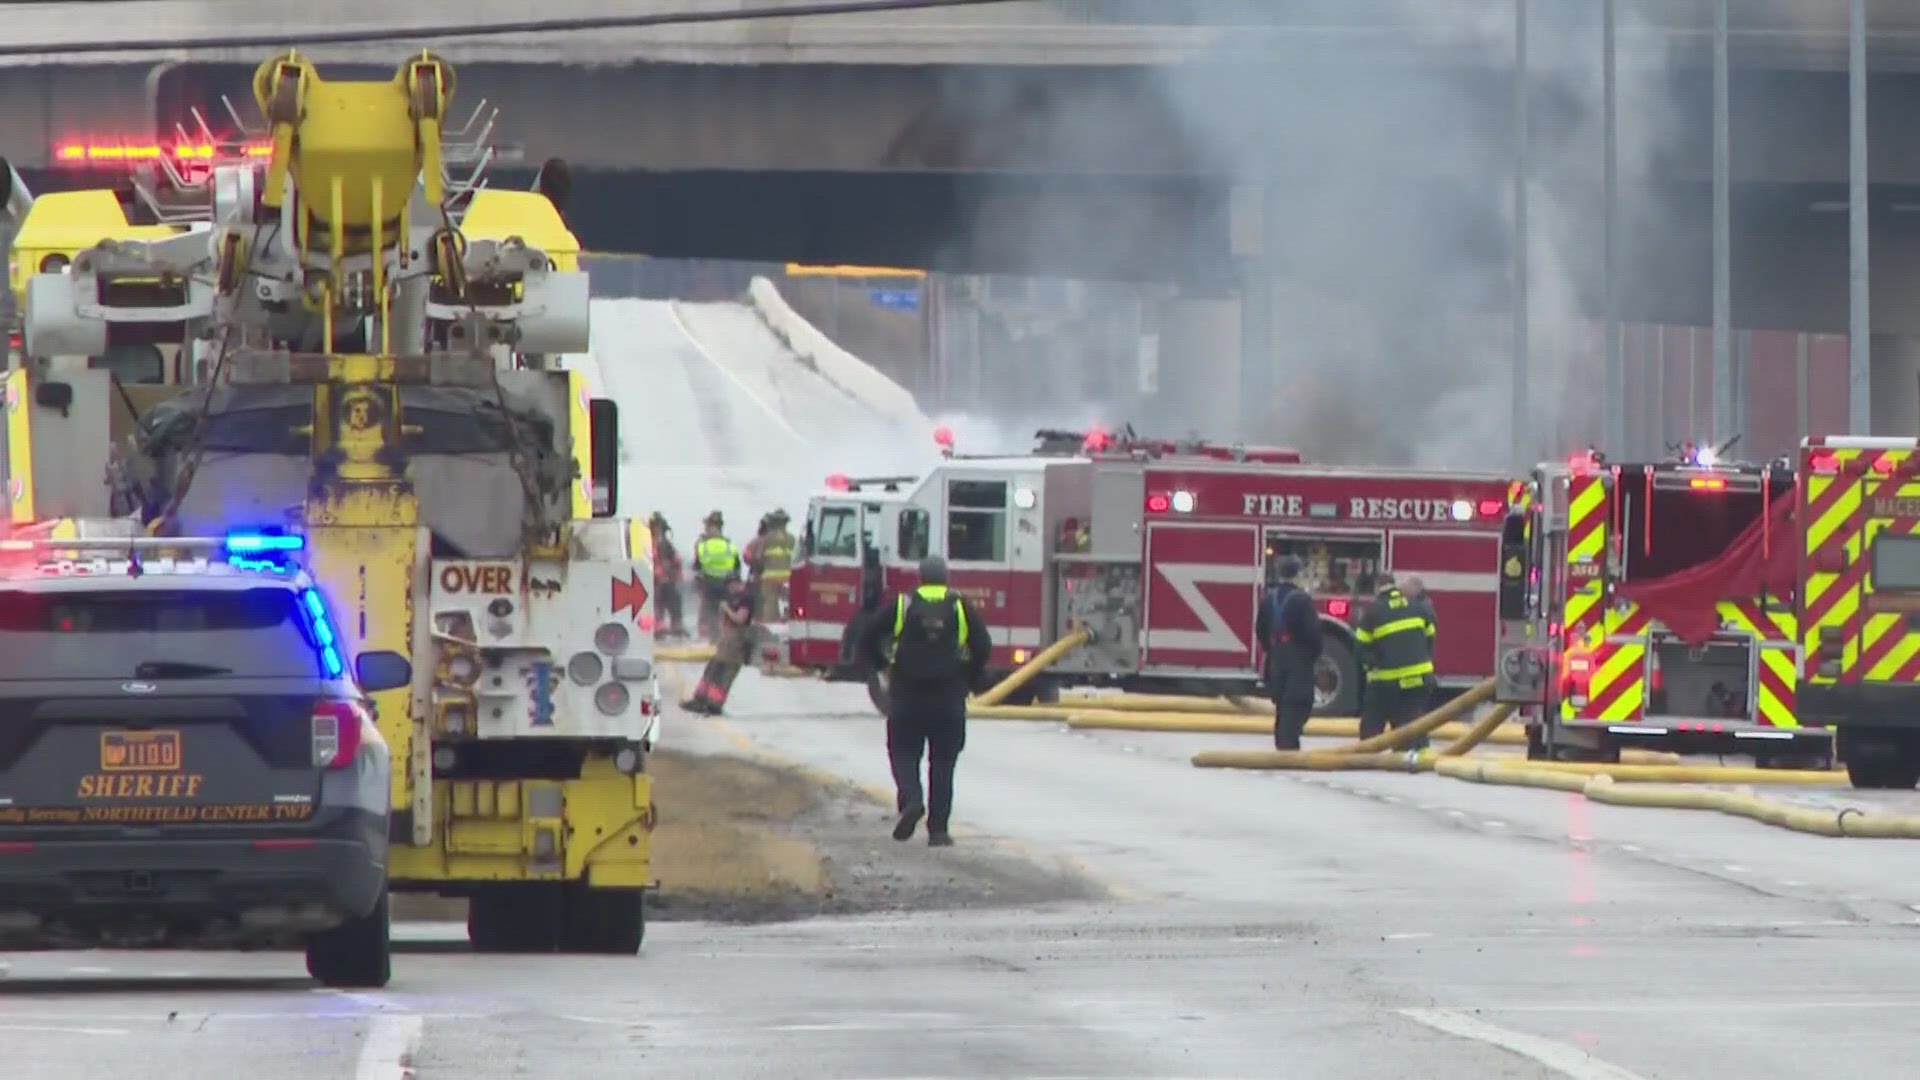 EPA officials told 10TV’s sister station in Cleveland WKYC that the tanker was carrying 7,500 gallons of diesel.